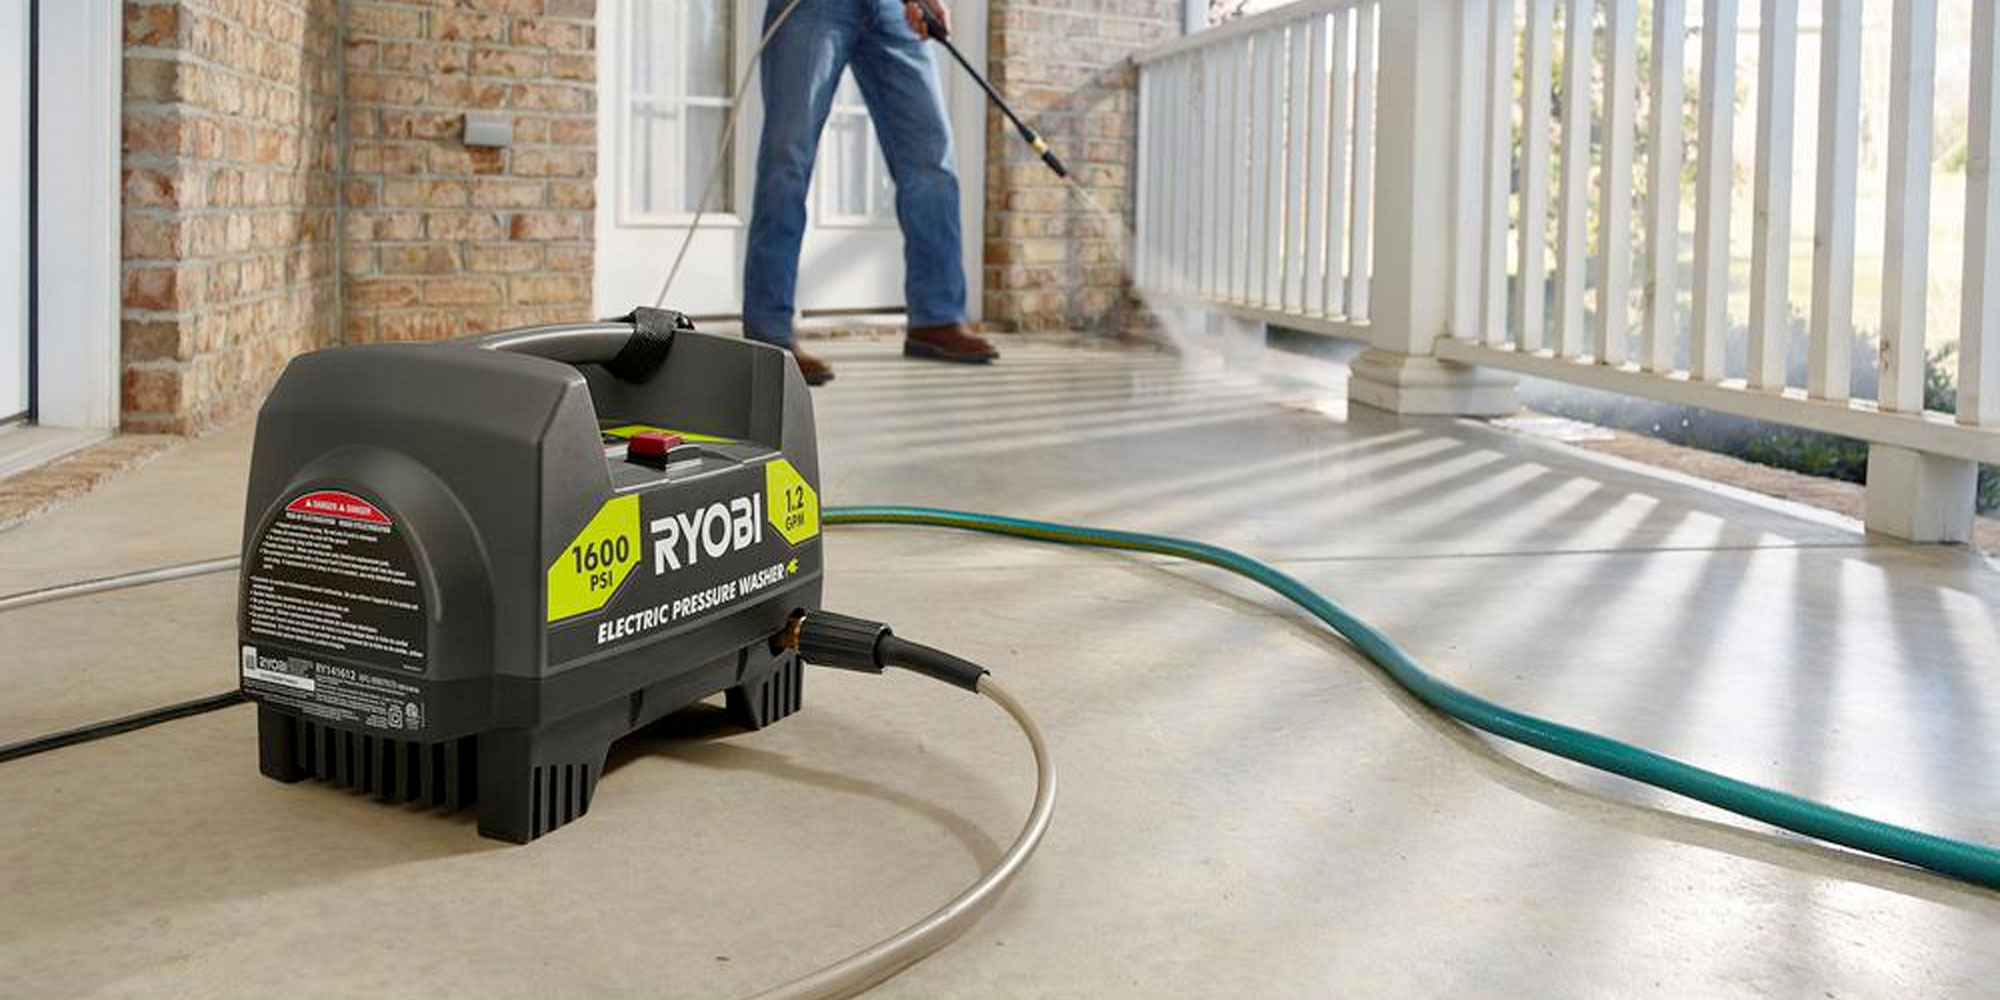 https://9to5toys.com/wp-content/uploads/sites/5/2019/07/Ryobi-Electric-Pressure-Washer.jpg